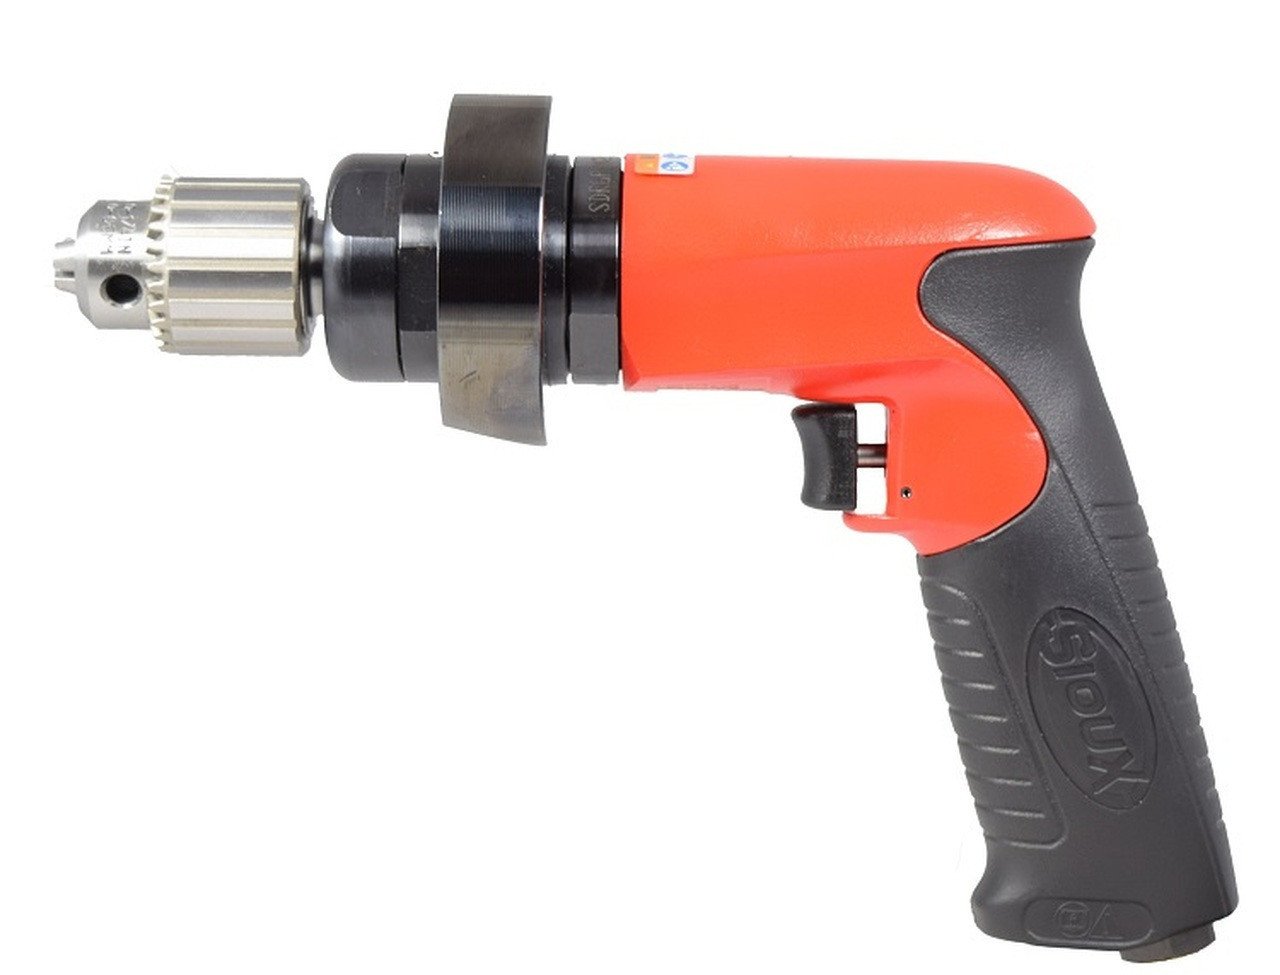 Sioux Tools SDR6P3N2 Non-Reversible Pistol Grip Drill | 0.60 HP | 300 RPM | 1/4" Keyed Chuck